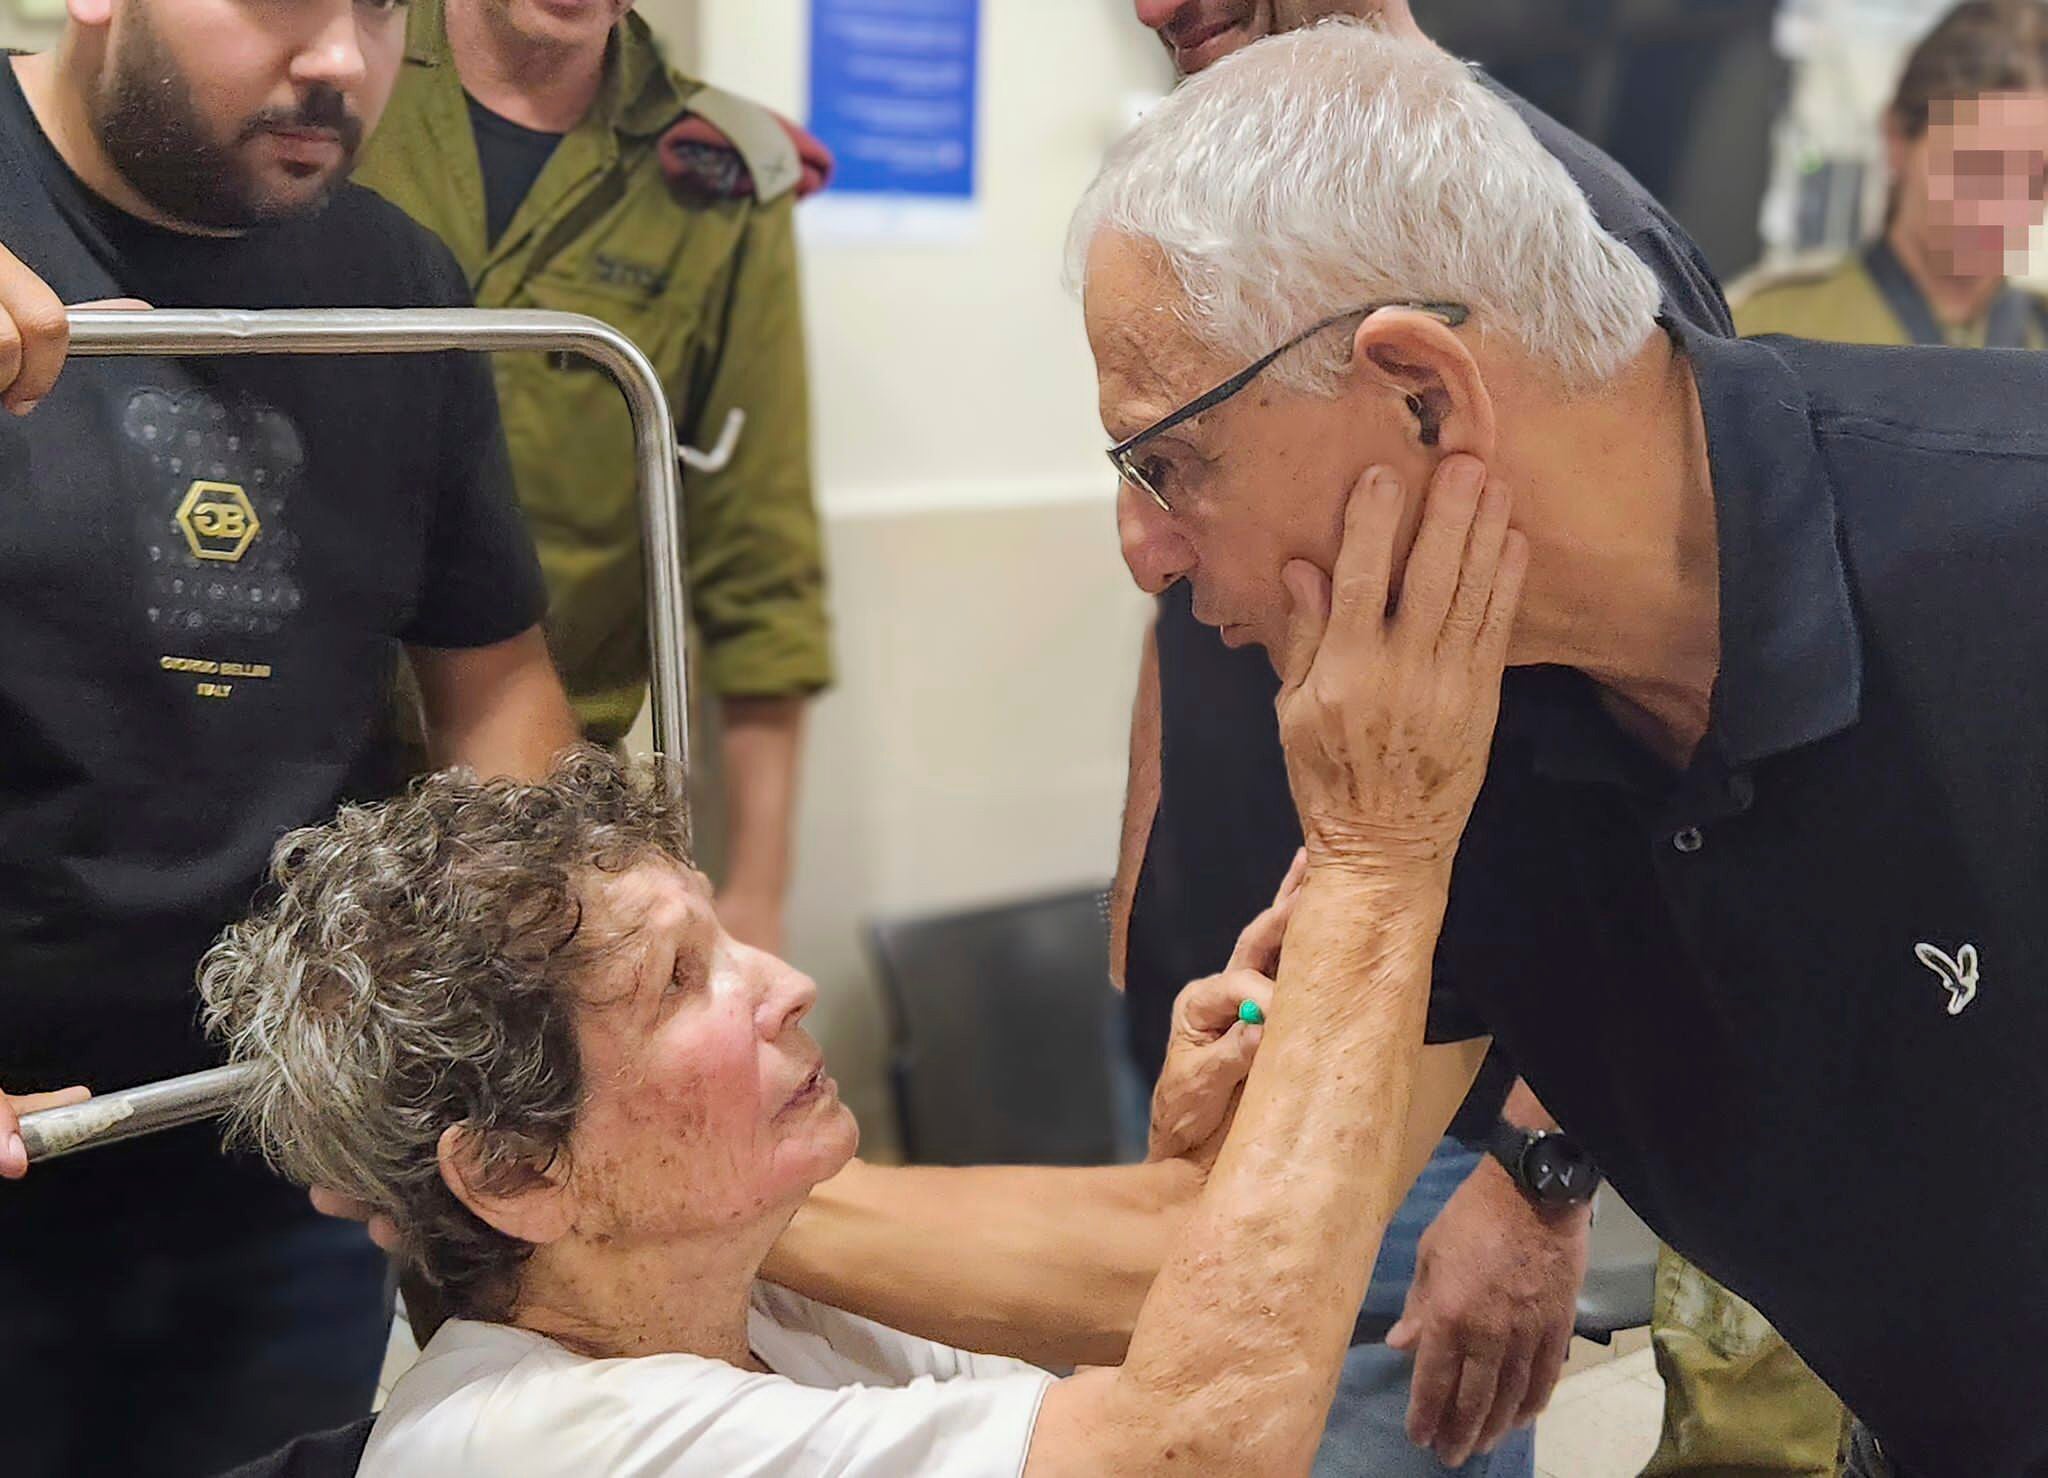 Yocheved Lifshitz, one of the two women released from Hamas captivity, meets people at the hospital in Tel Aviv, Israel.